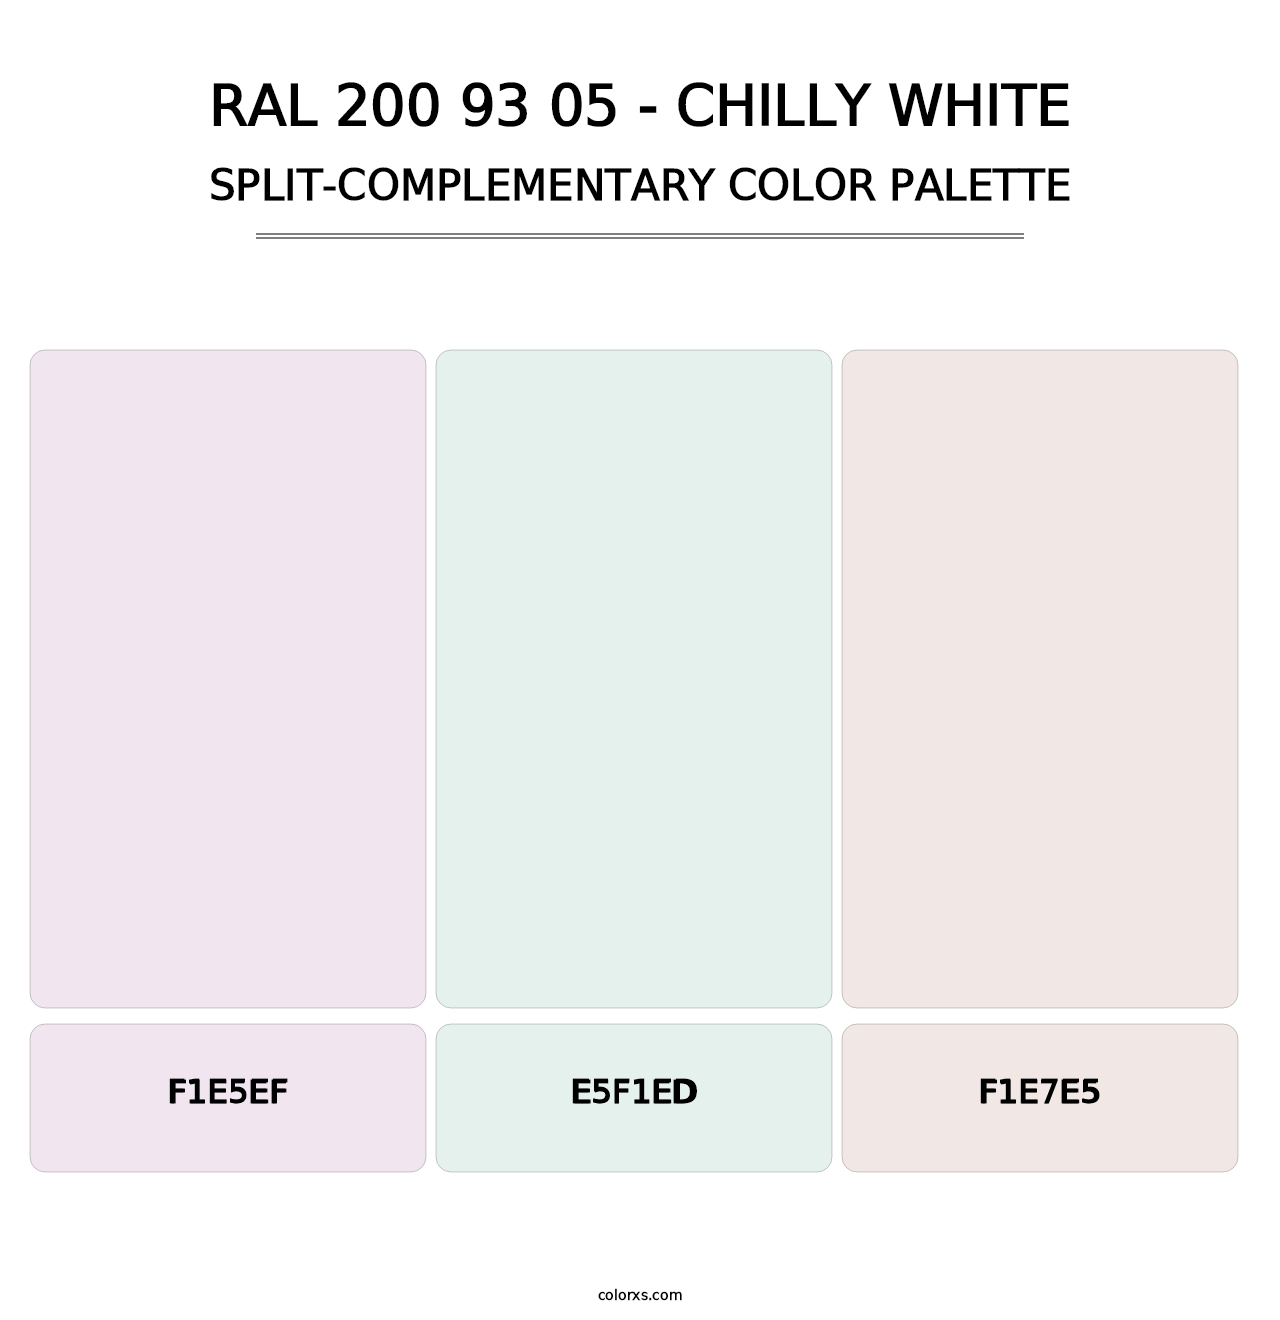 RAL 200 93 05 - Chilly White - Split-Complementary Color Palette